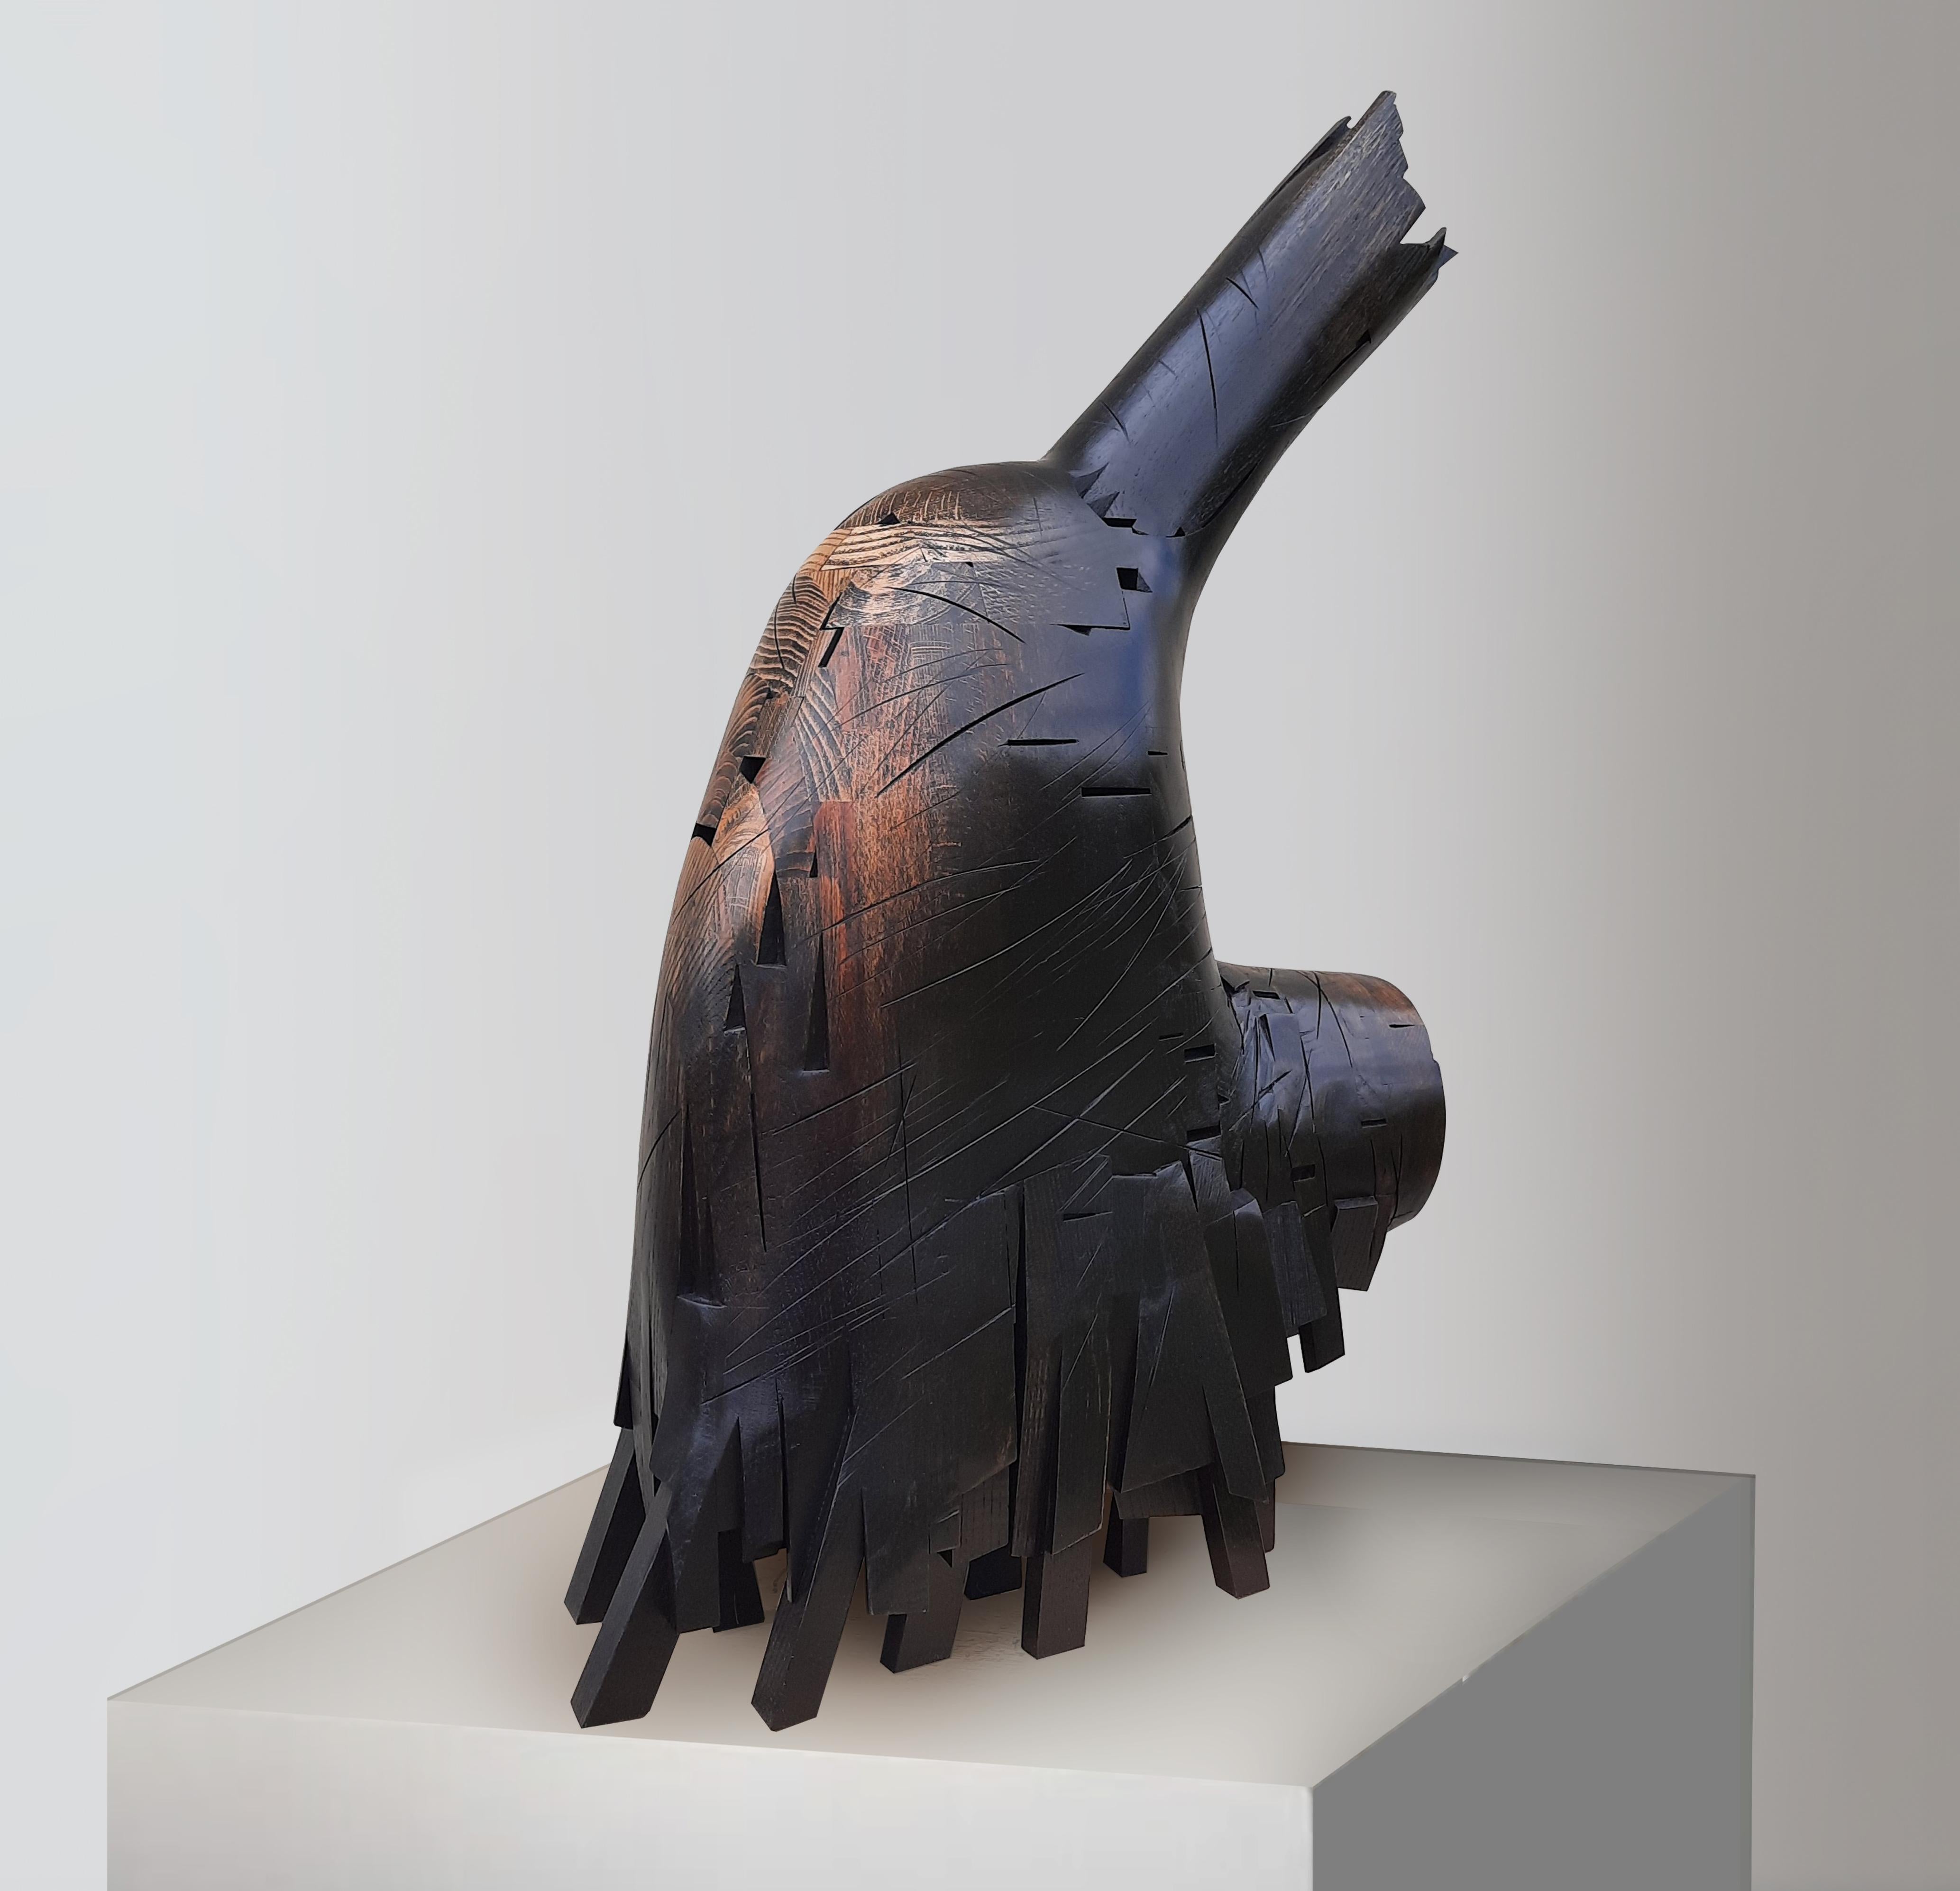 Valery Pchelin’s distinct approach to sculpture has been shaped by his early experience as a carpenter: different pieces of wood are assembled to construct intriguing artworks full of emotions.

Valery conceives his sculptures to physically capture